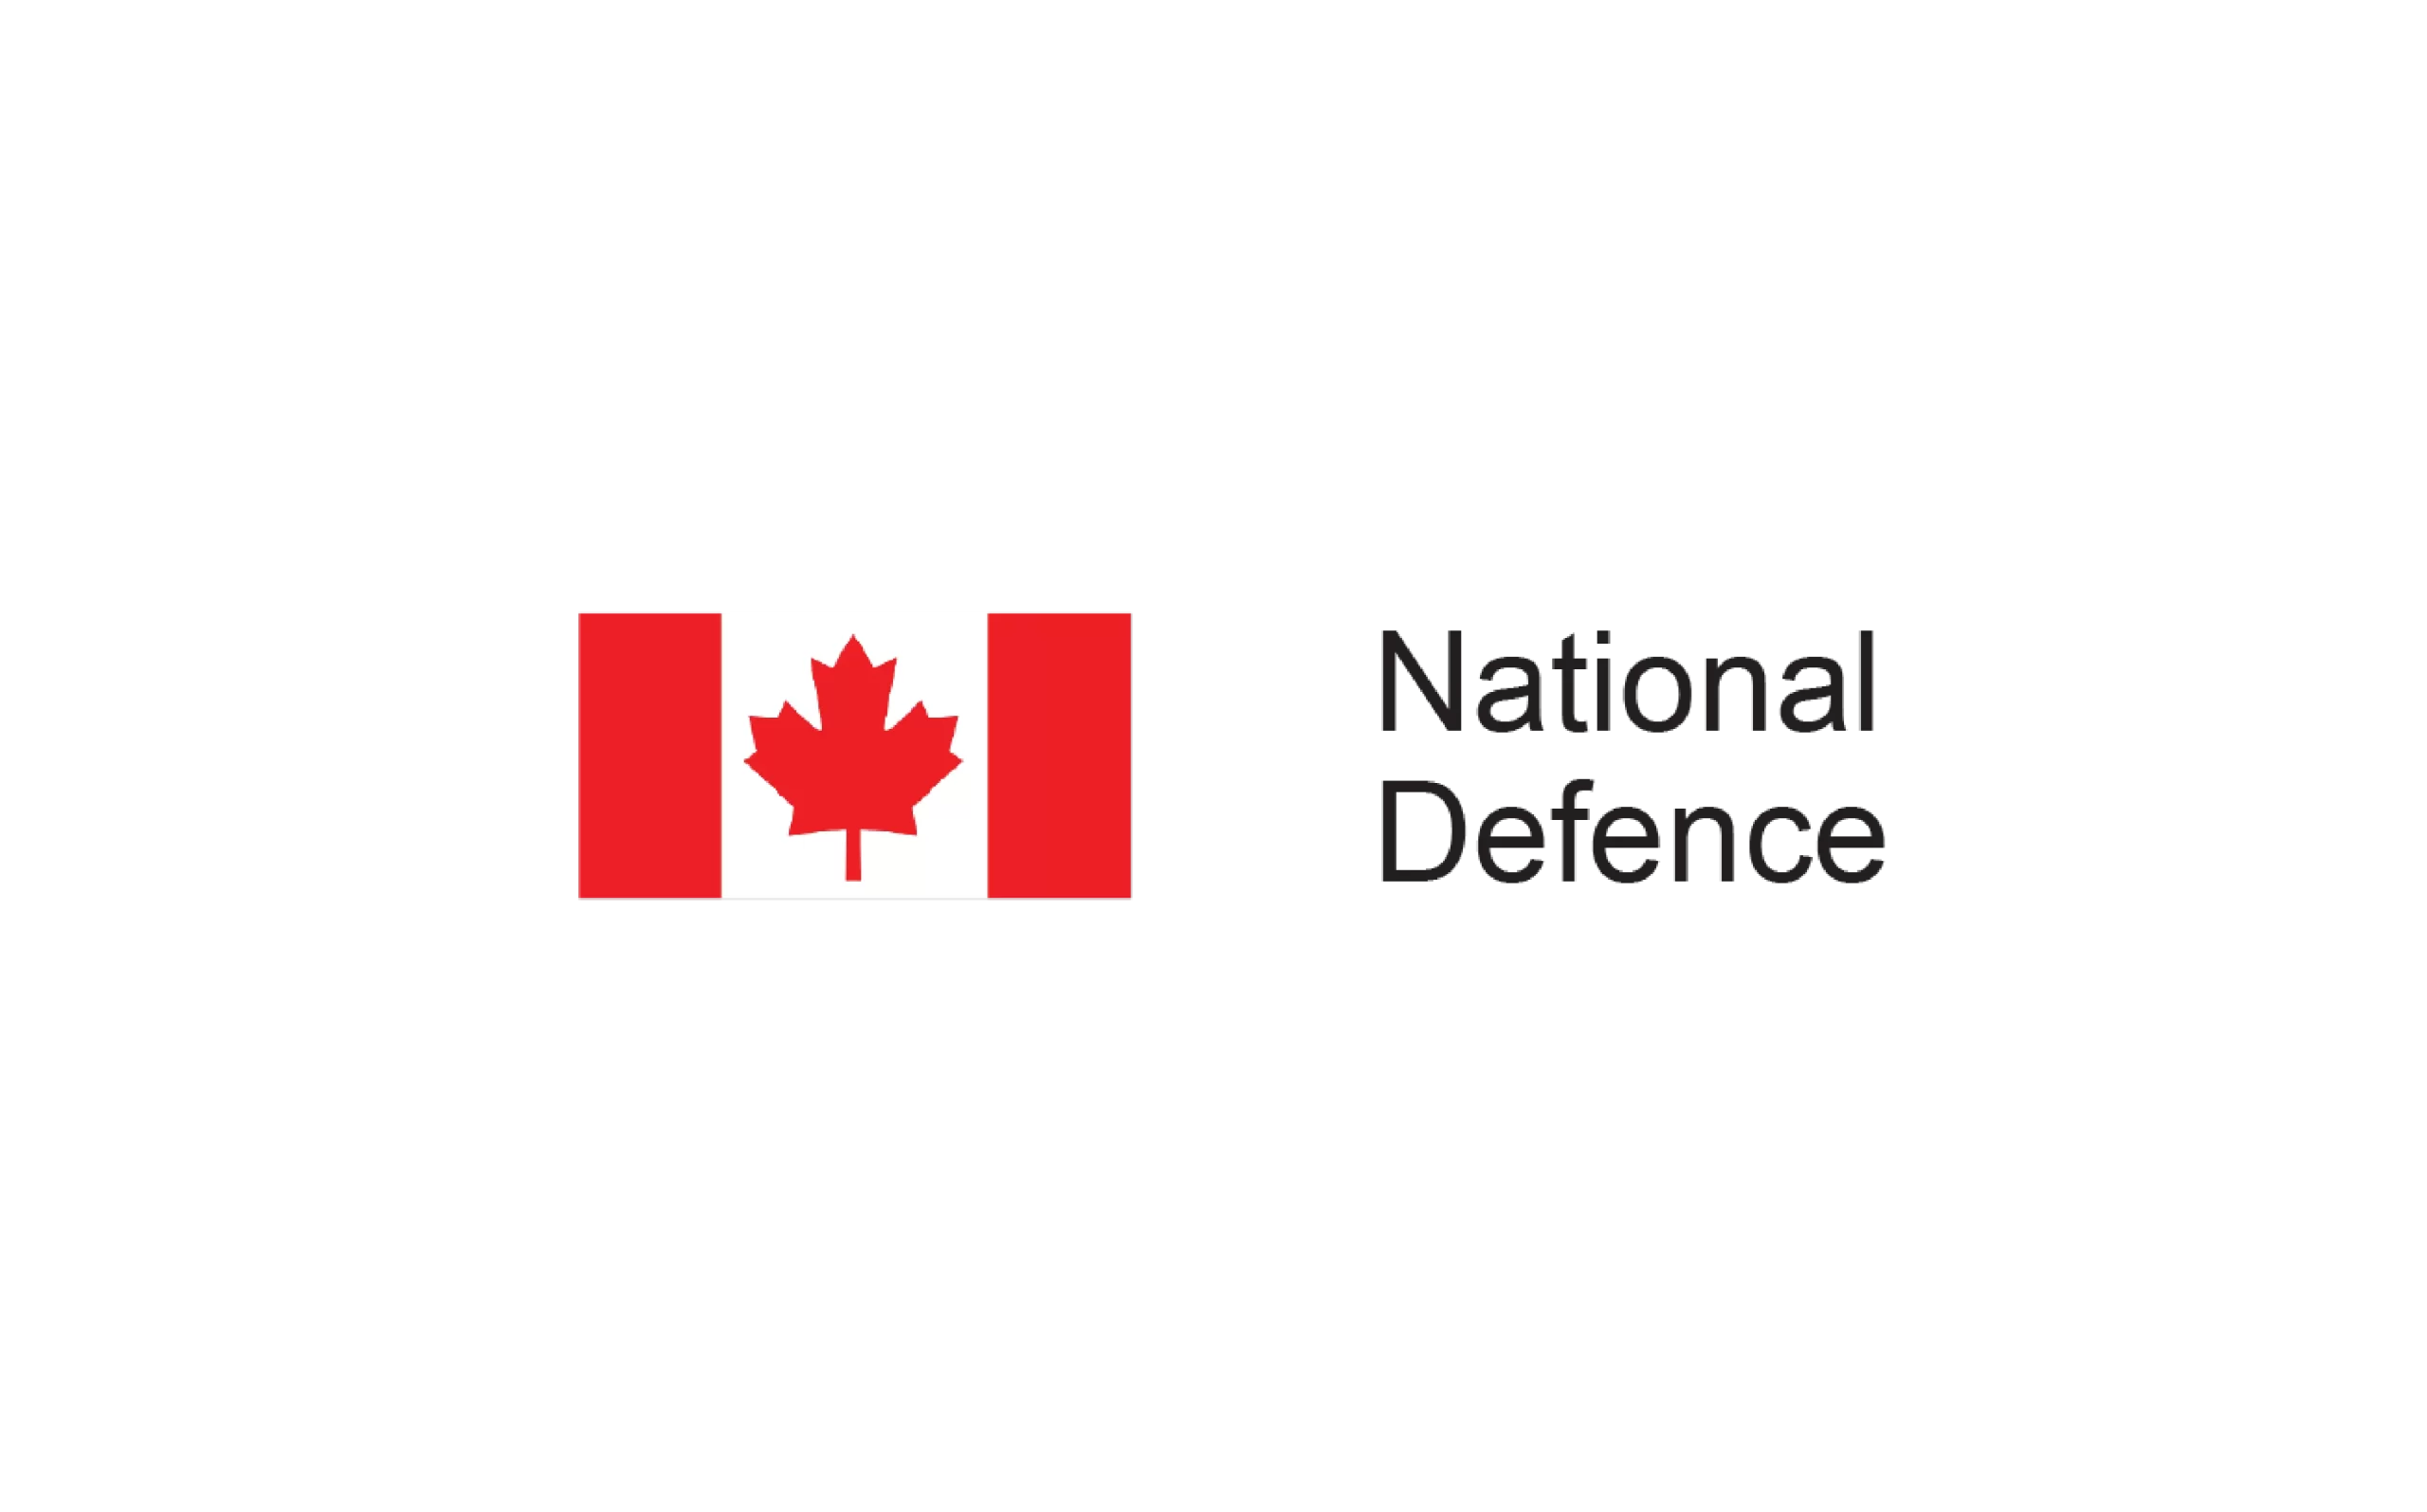 Red and white National Defence logo